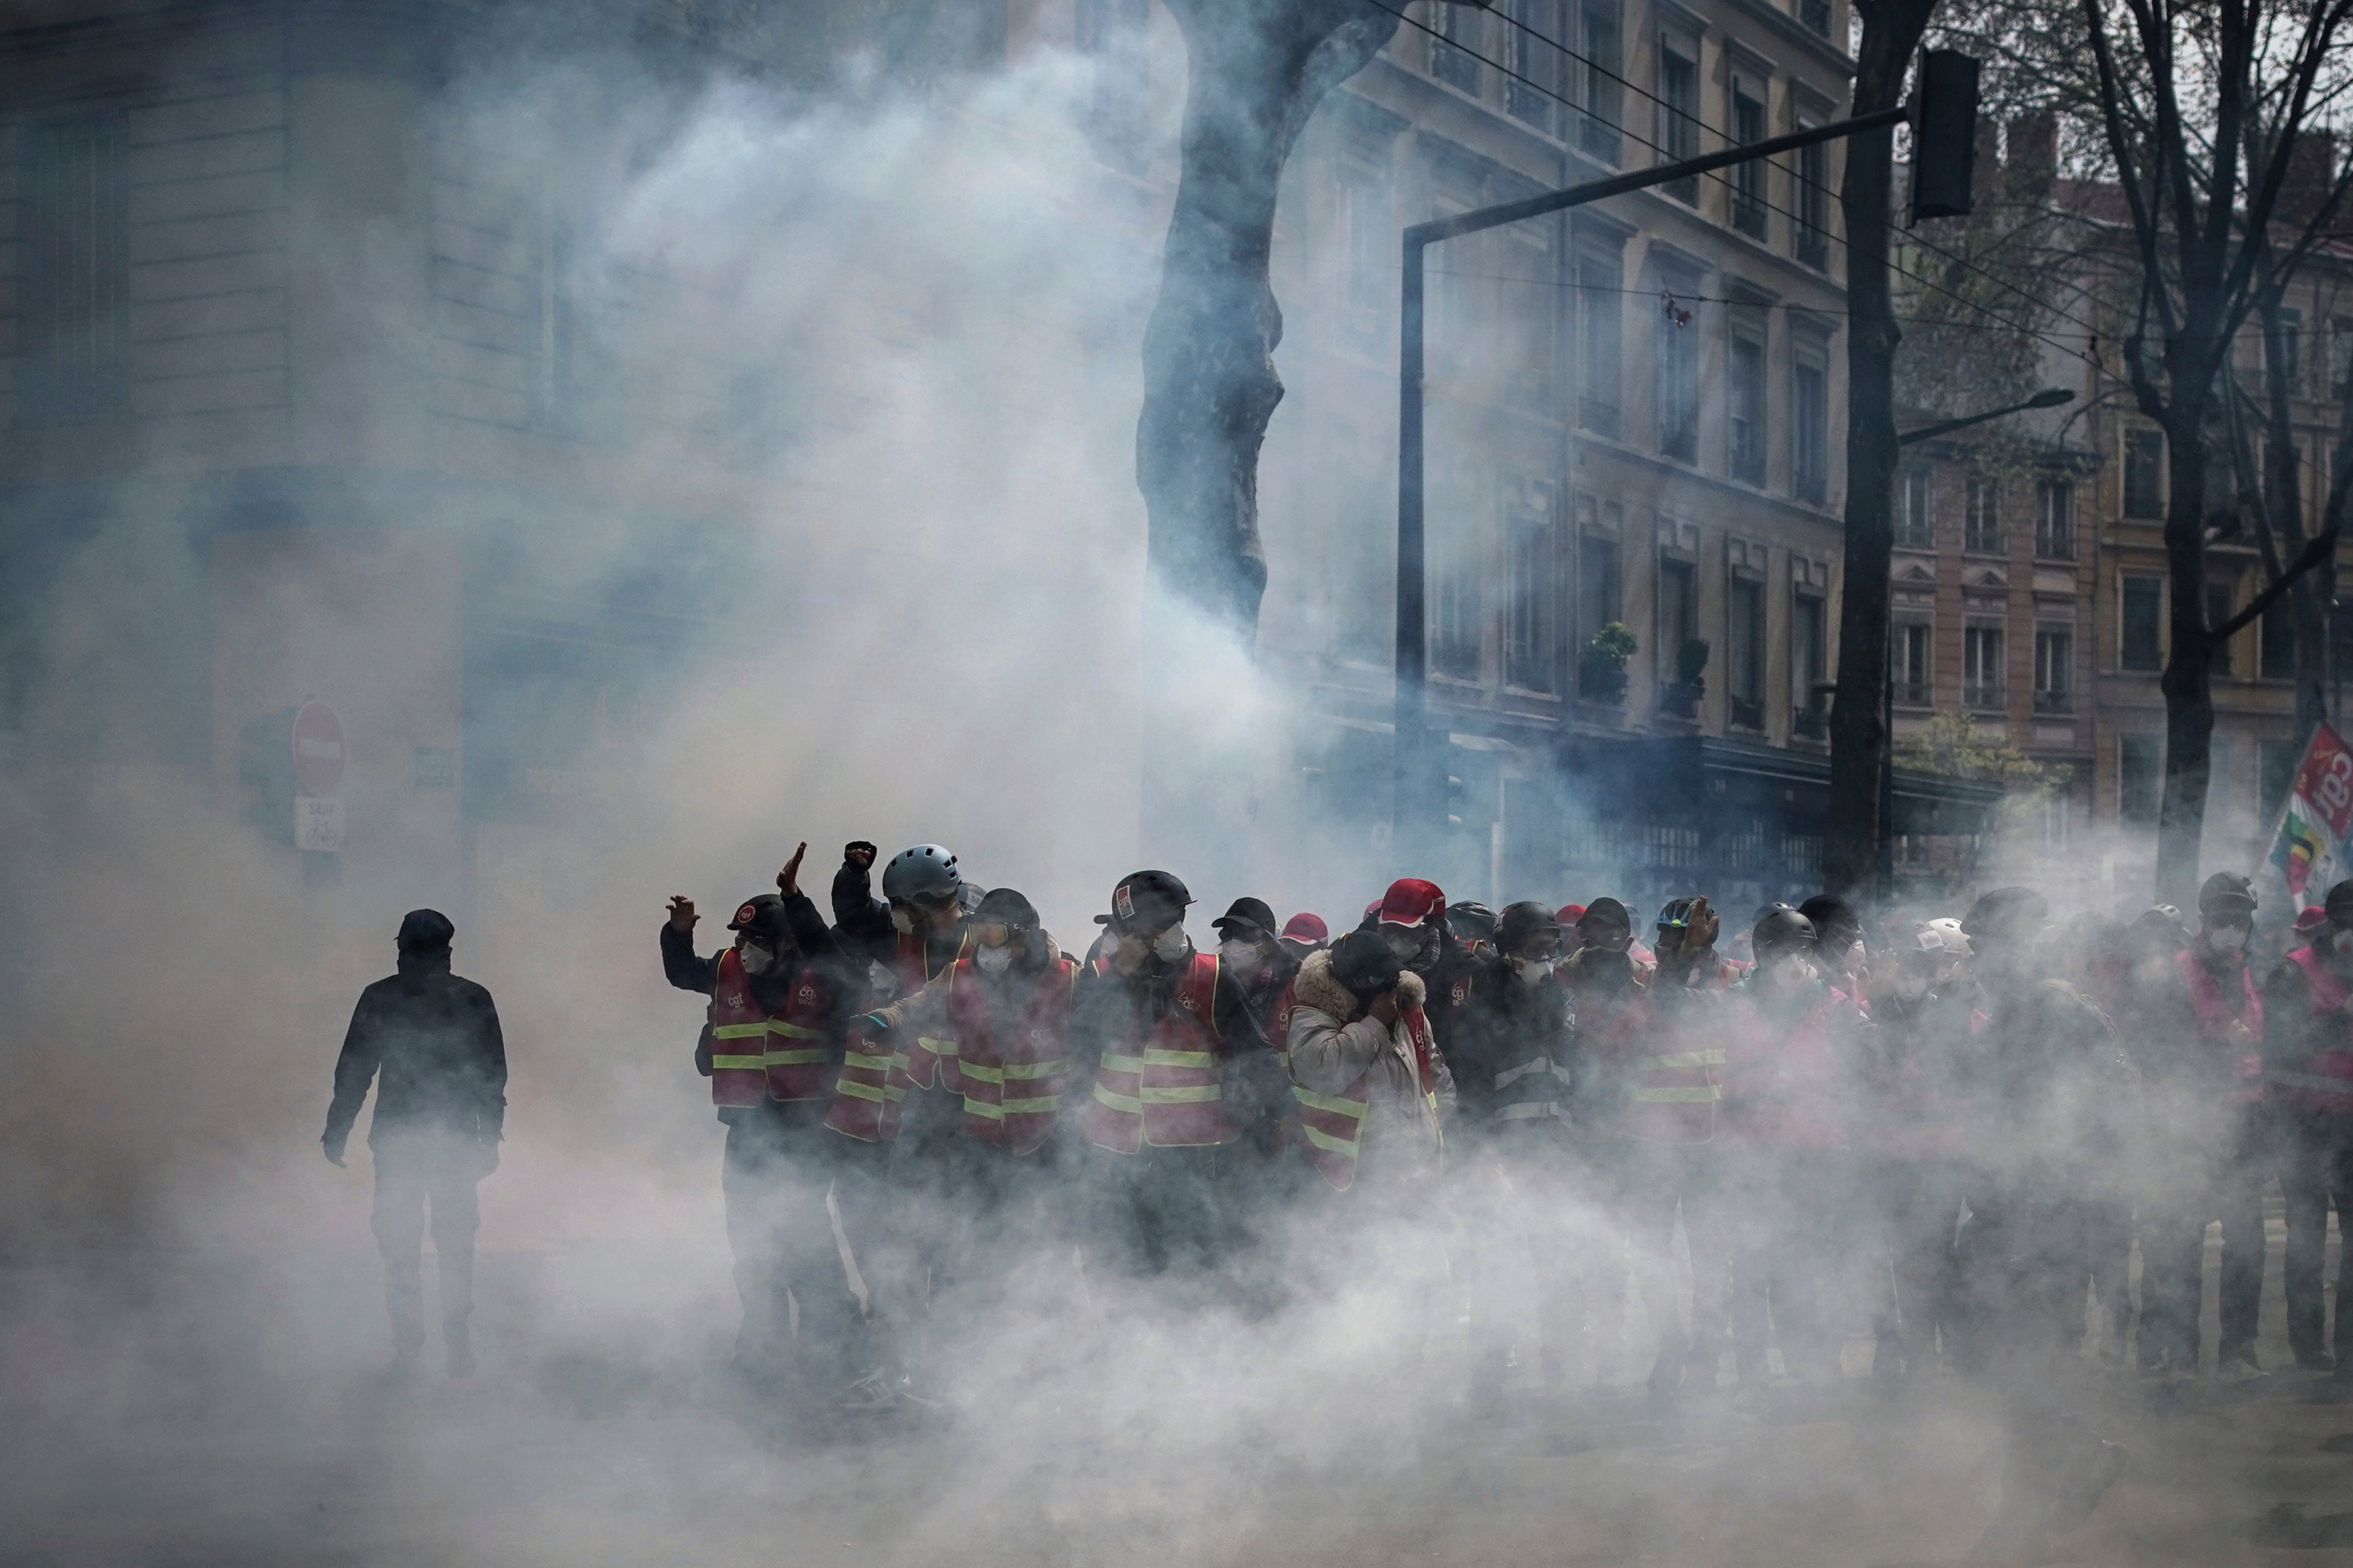 Union members stand in tear gas in Lyon on Thursday